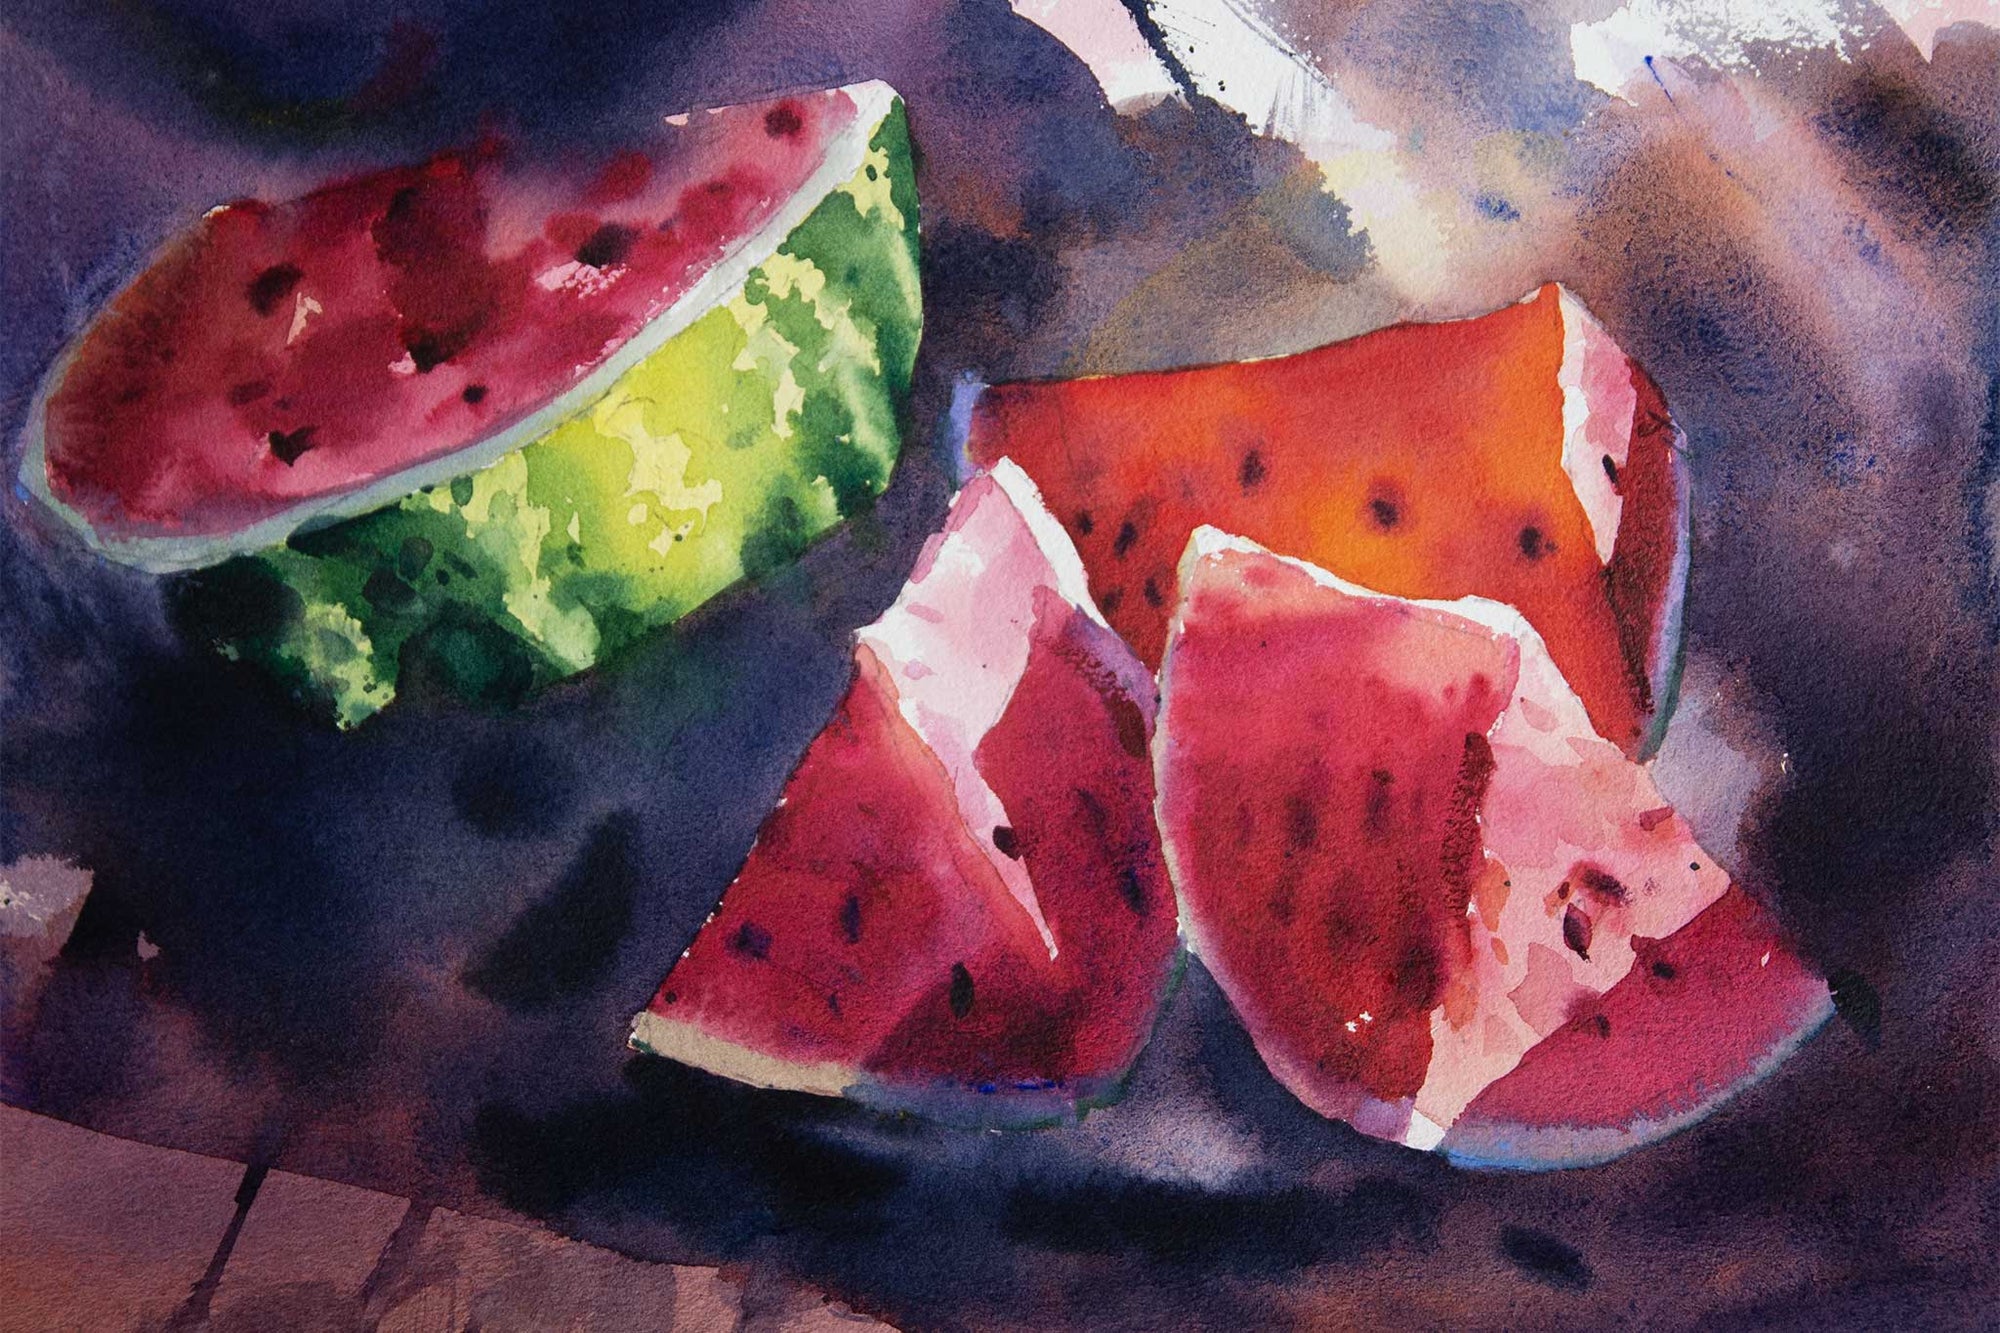 Watermelon Slices - Pushing the Colour With Simple Shapes & Tones